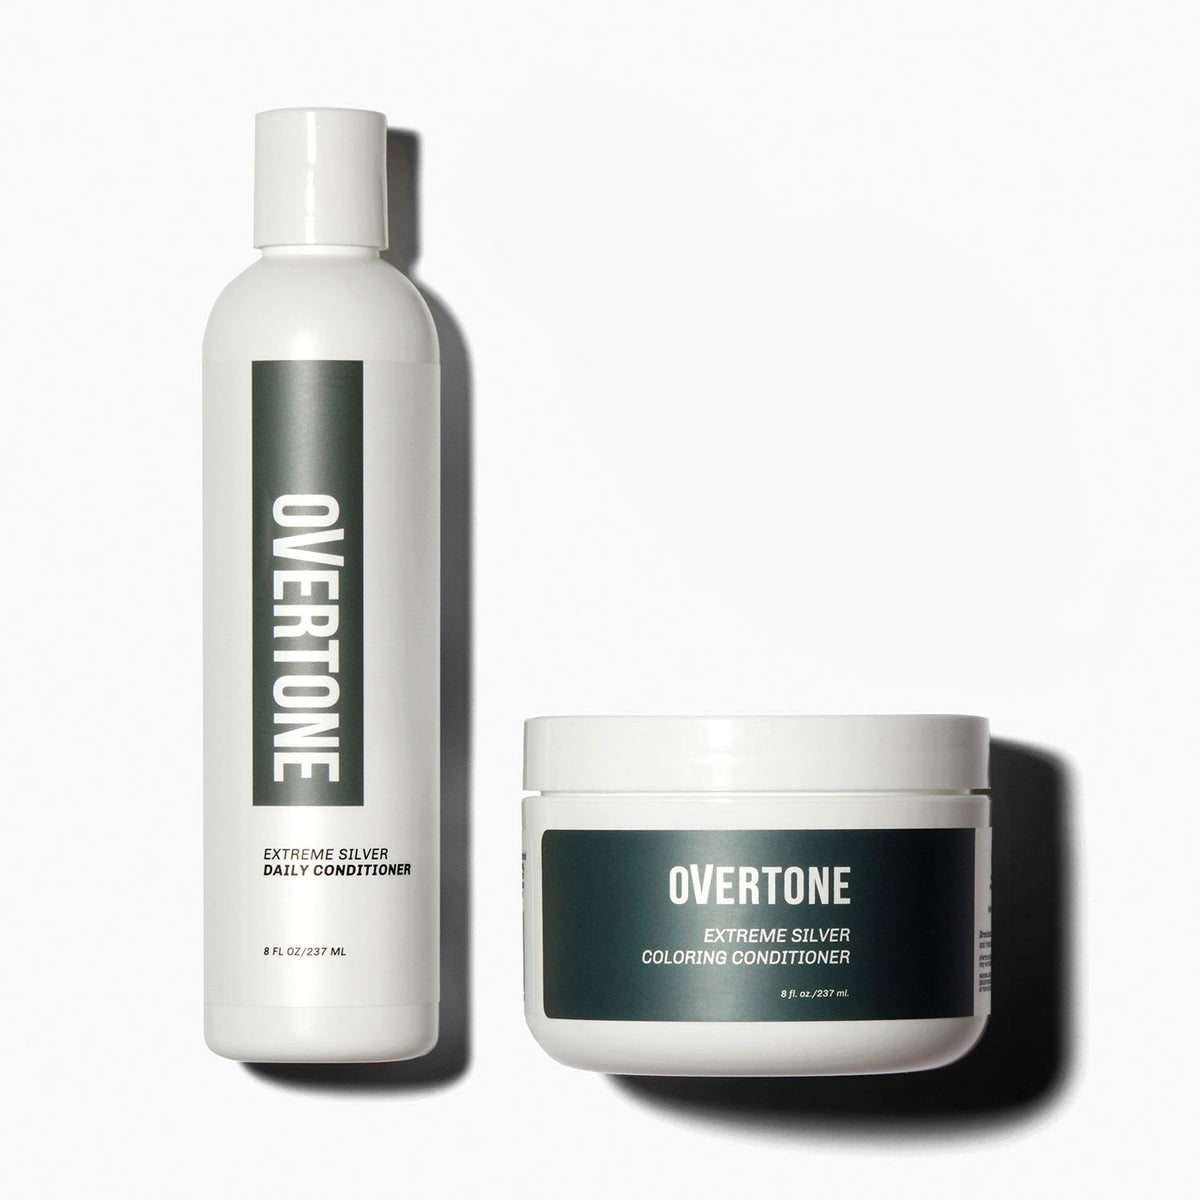 oVertone Extreme Silver Coloring Conditioner and Daily Conditioner